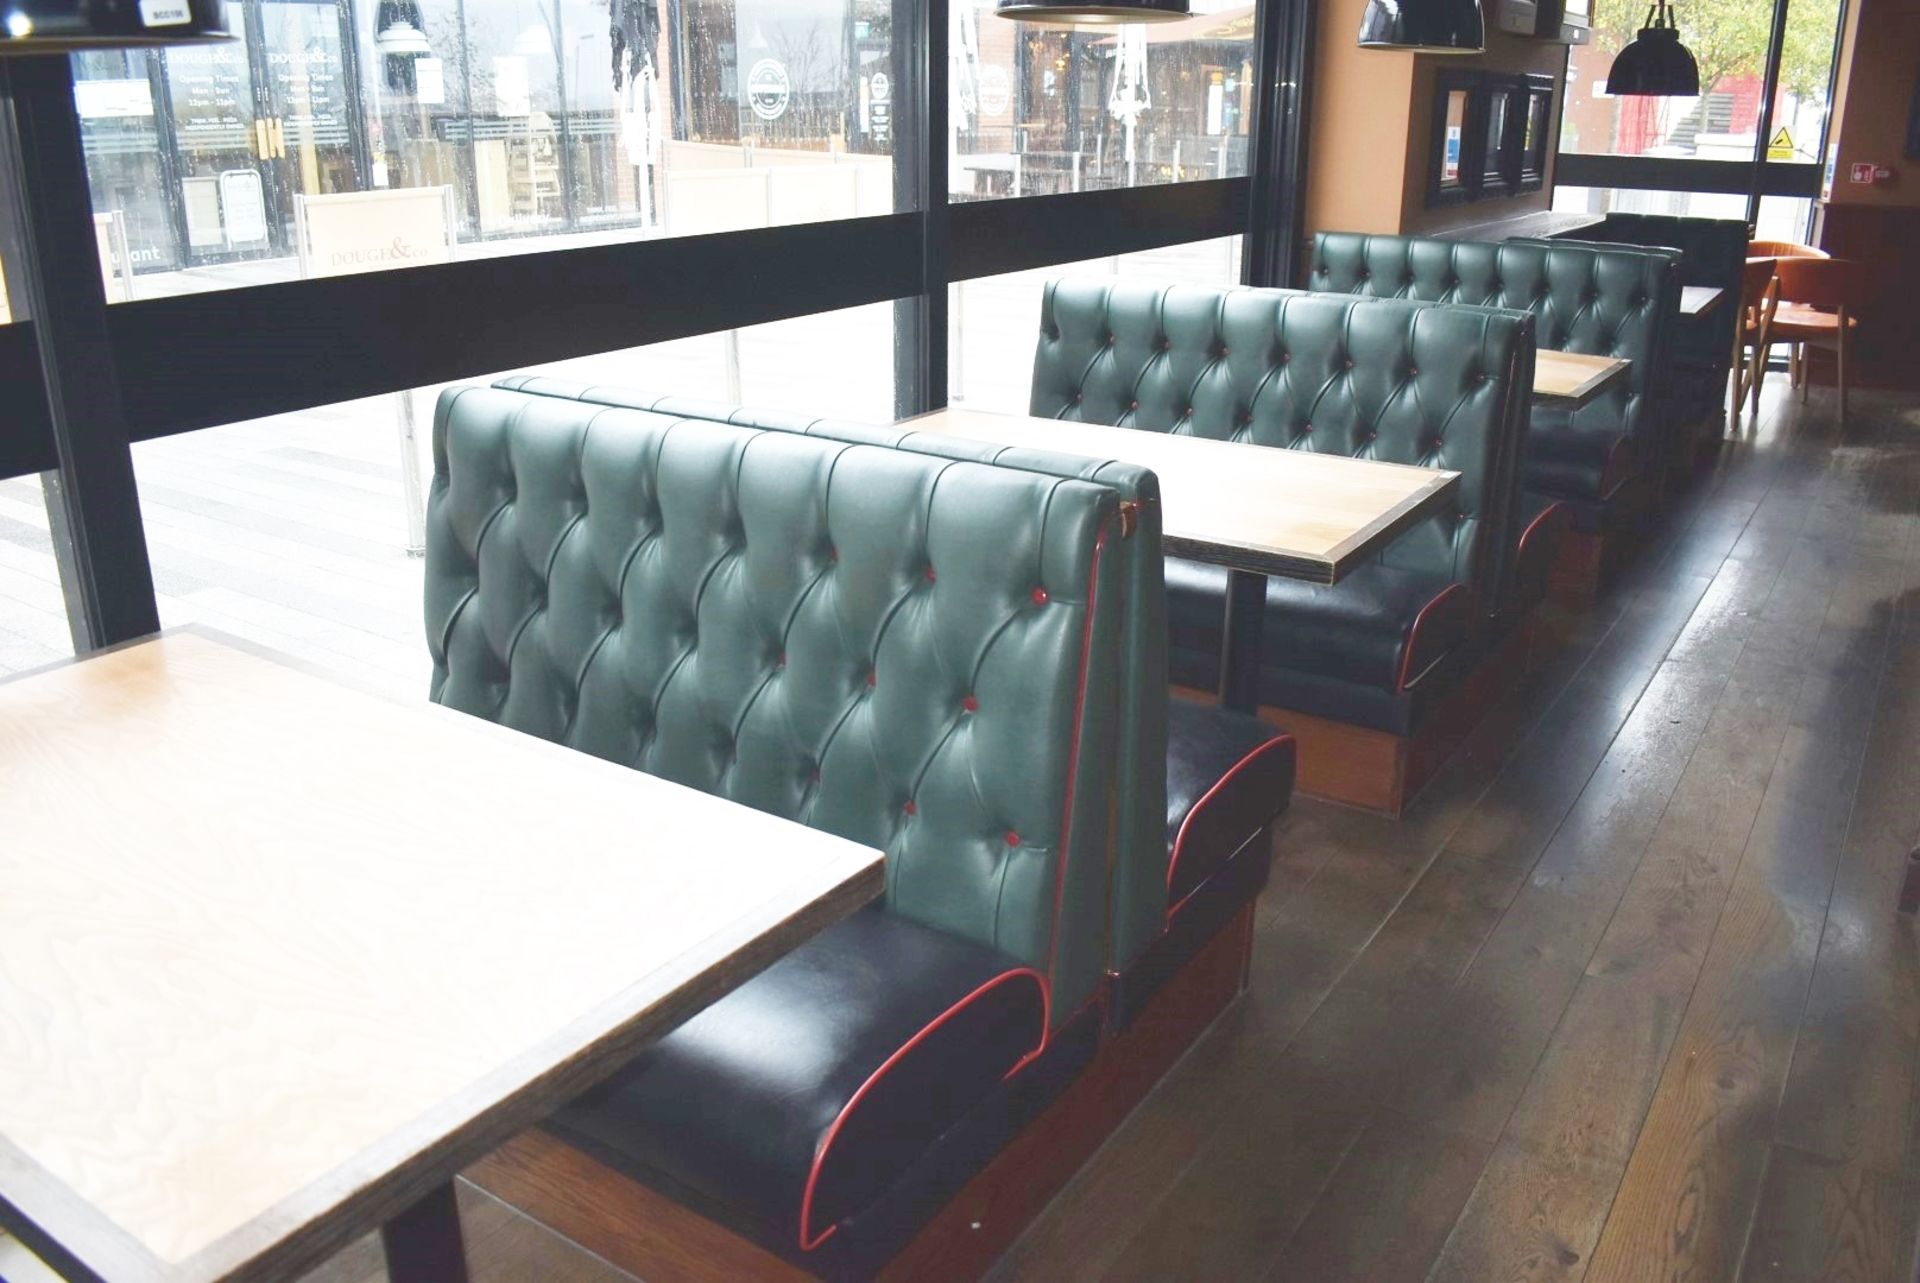 4 x Sections of Restaurant Double Booth Seating - Sits Up to 12 Persons - Green & Black Upholstery